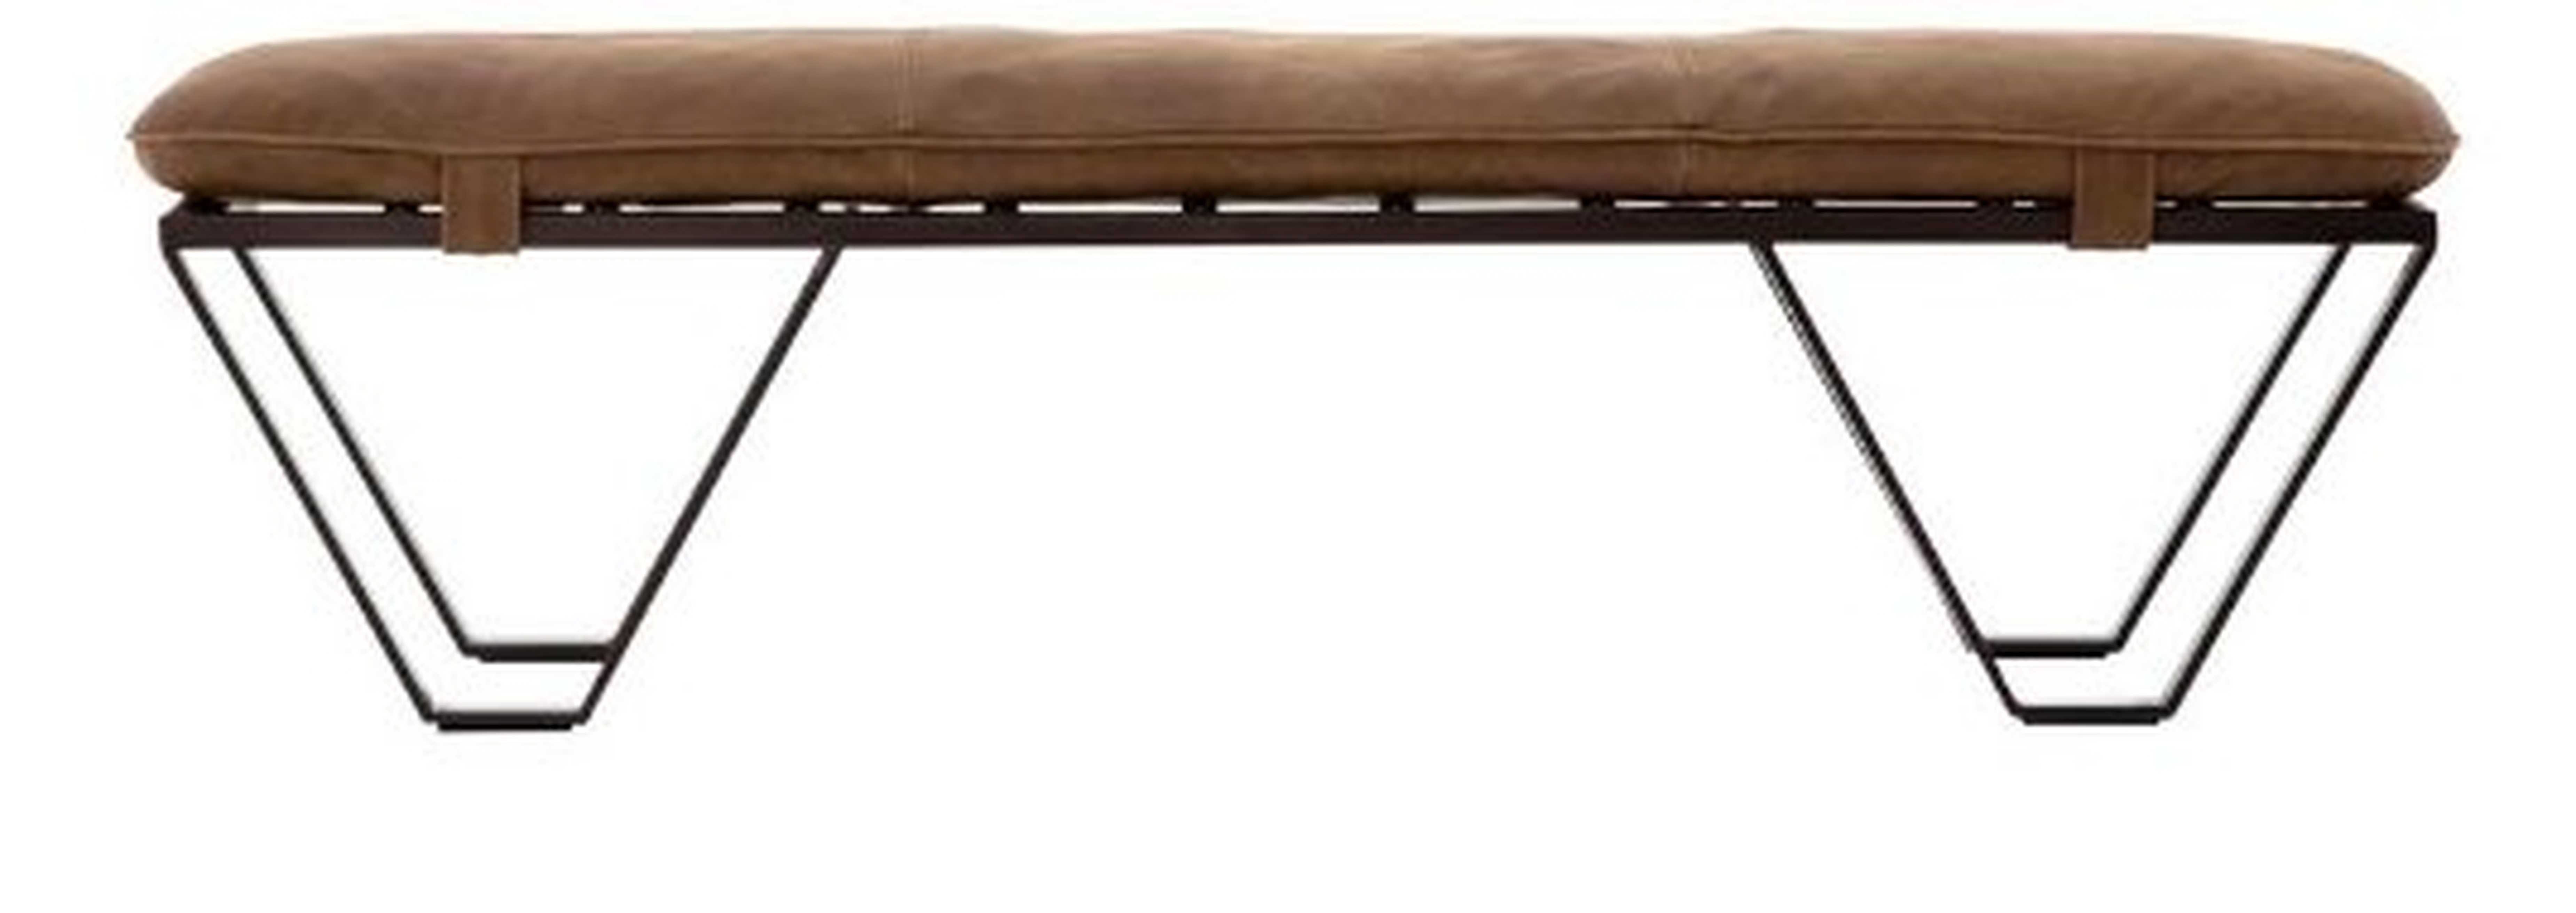 DREW LEATHER BENCH - McGee & Co.